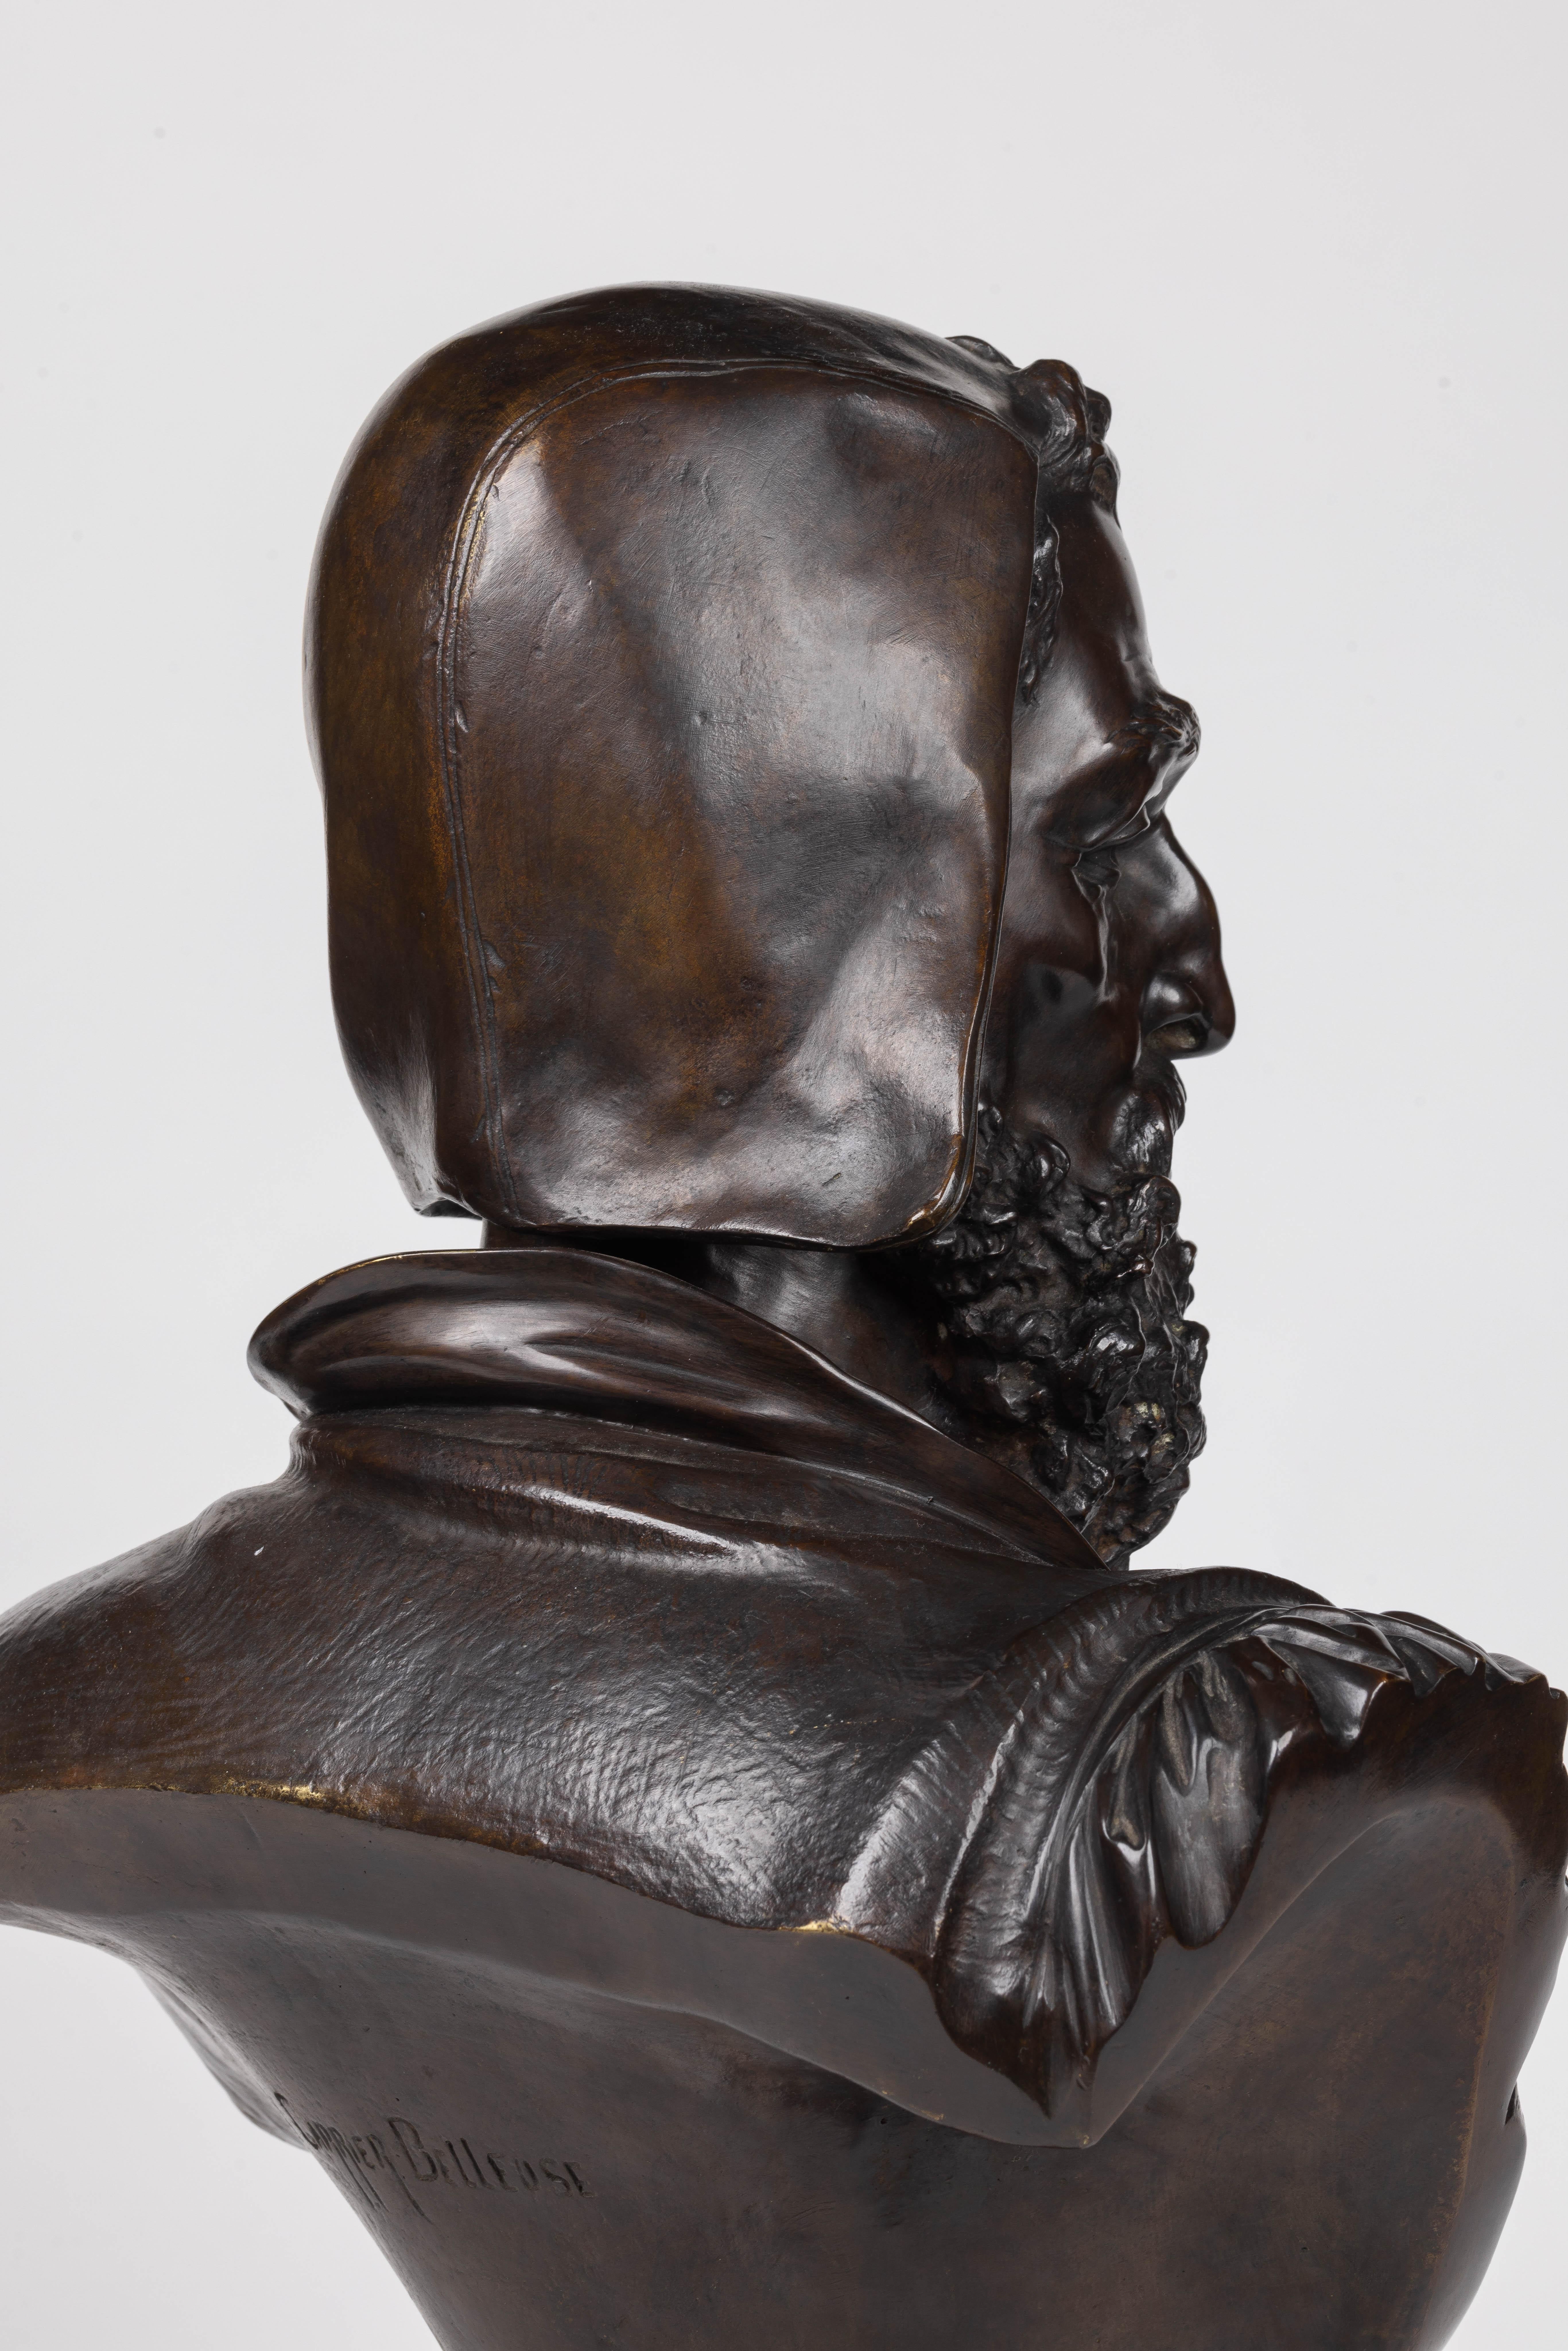 Albert-Ernest Carrier-Belleuse, A Rare and Important Bronze Bust of Michelangelo For Sale 4